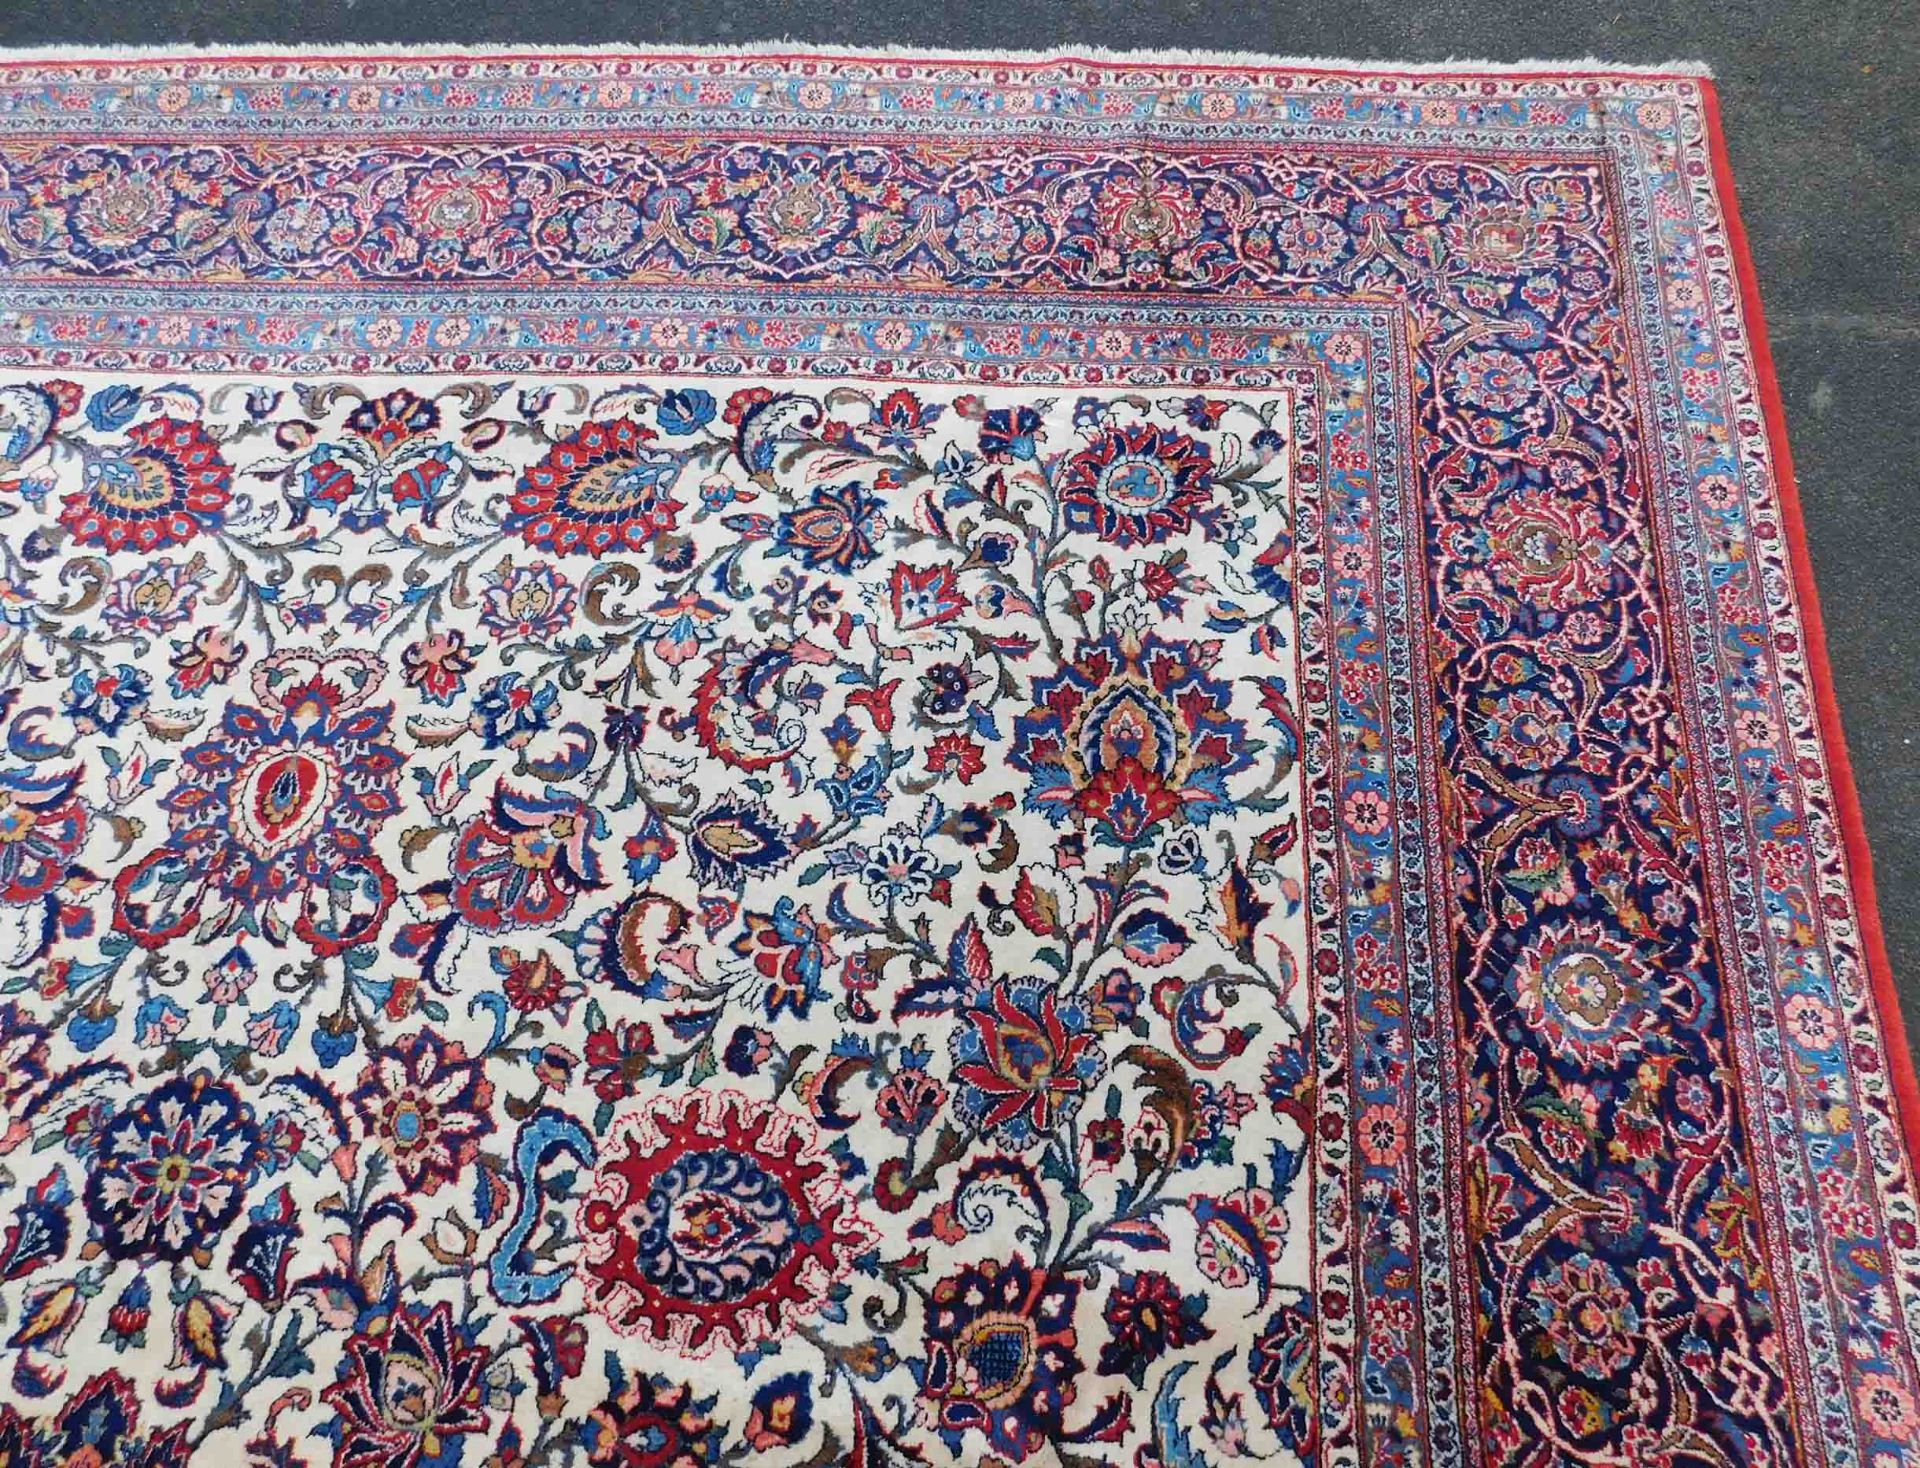 Keschan Persian carpet. Iran. Very fine weave. Cork wool.445 cm x 320 cm. Knotted by hand. Cork wool - Image 6 of 10